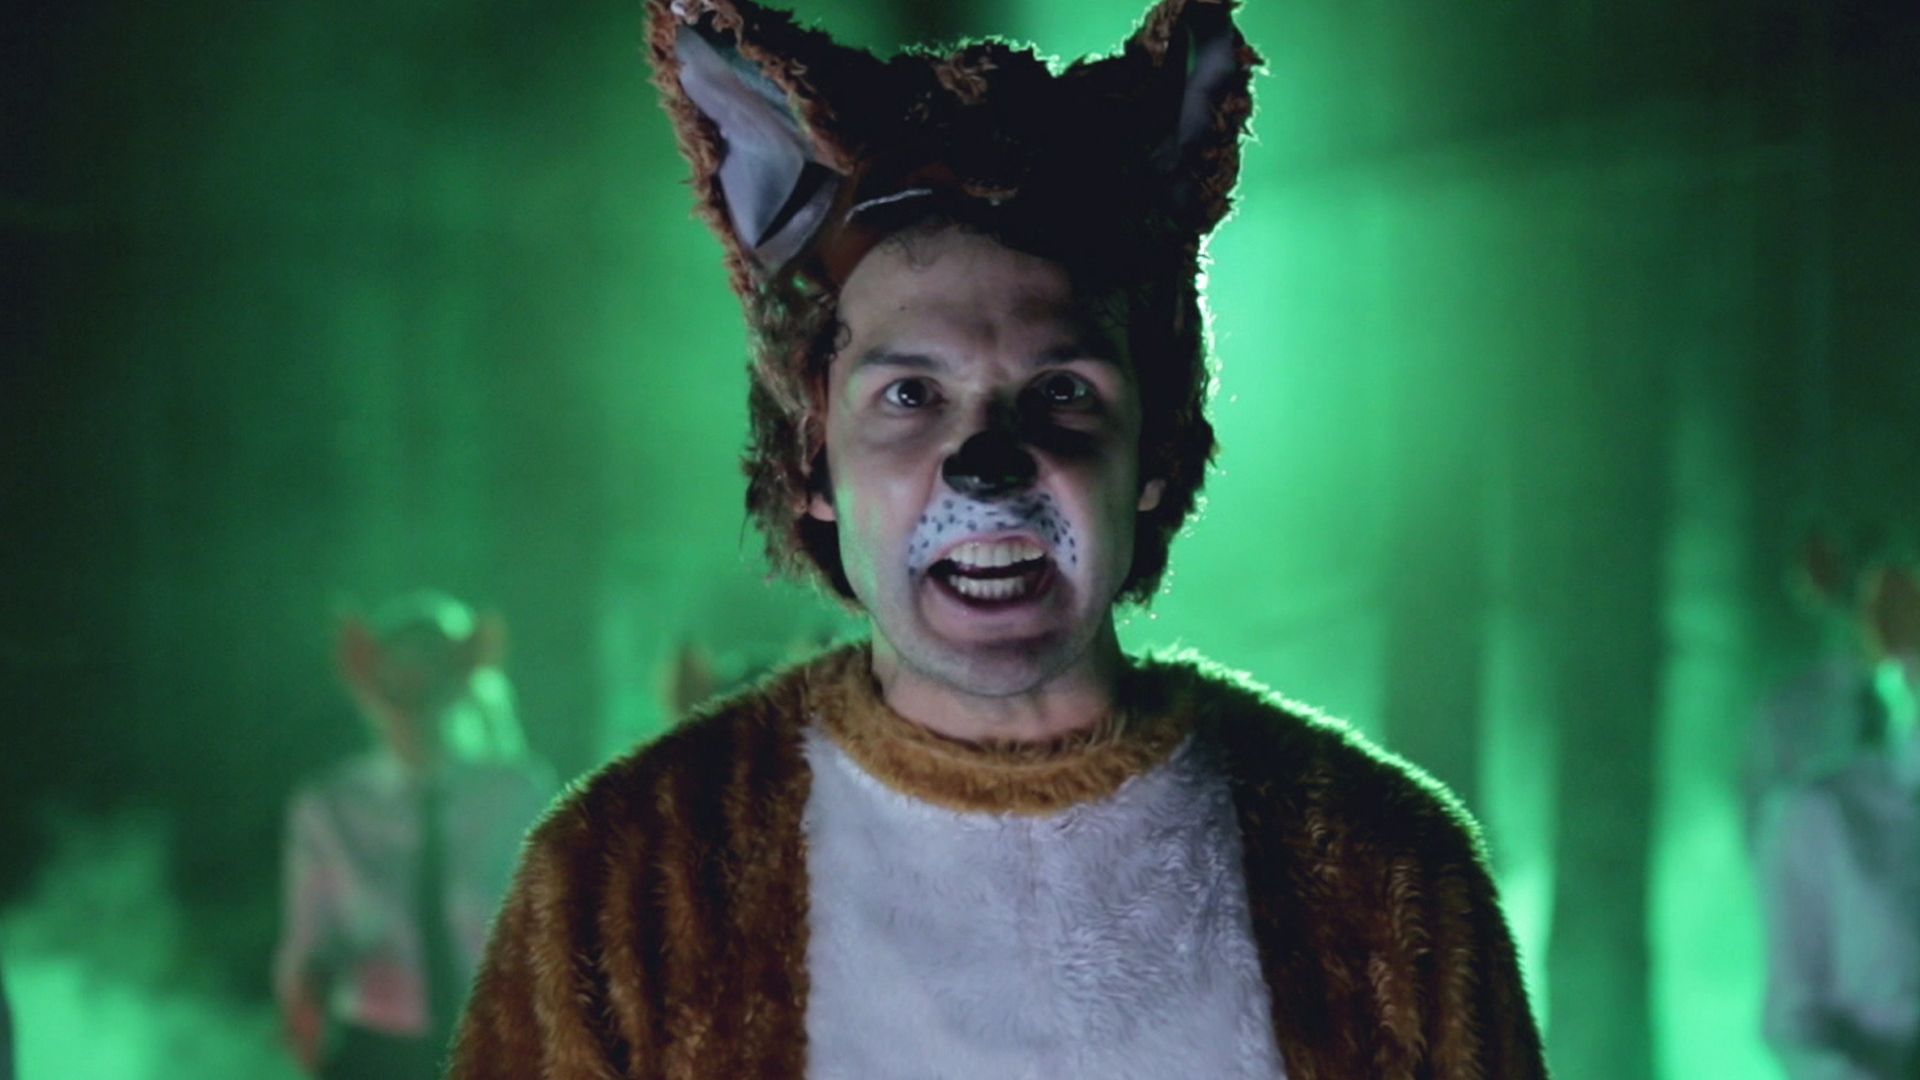 Ylvis Has Left The Forest: “What Does The Fox Say” finds its way